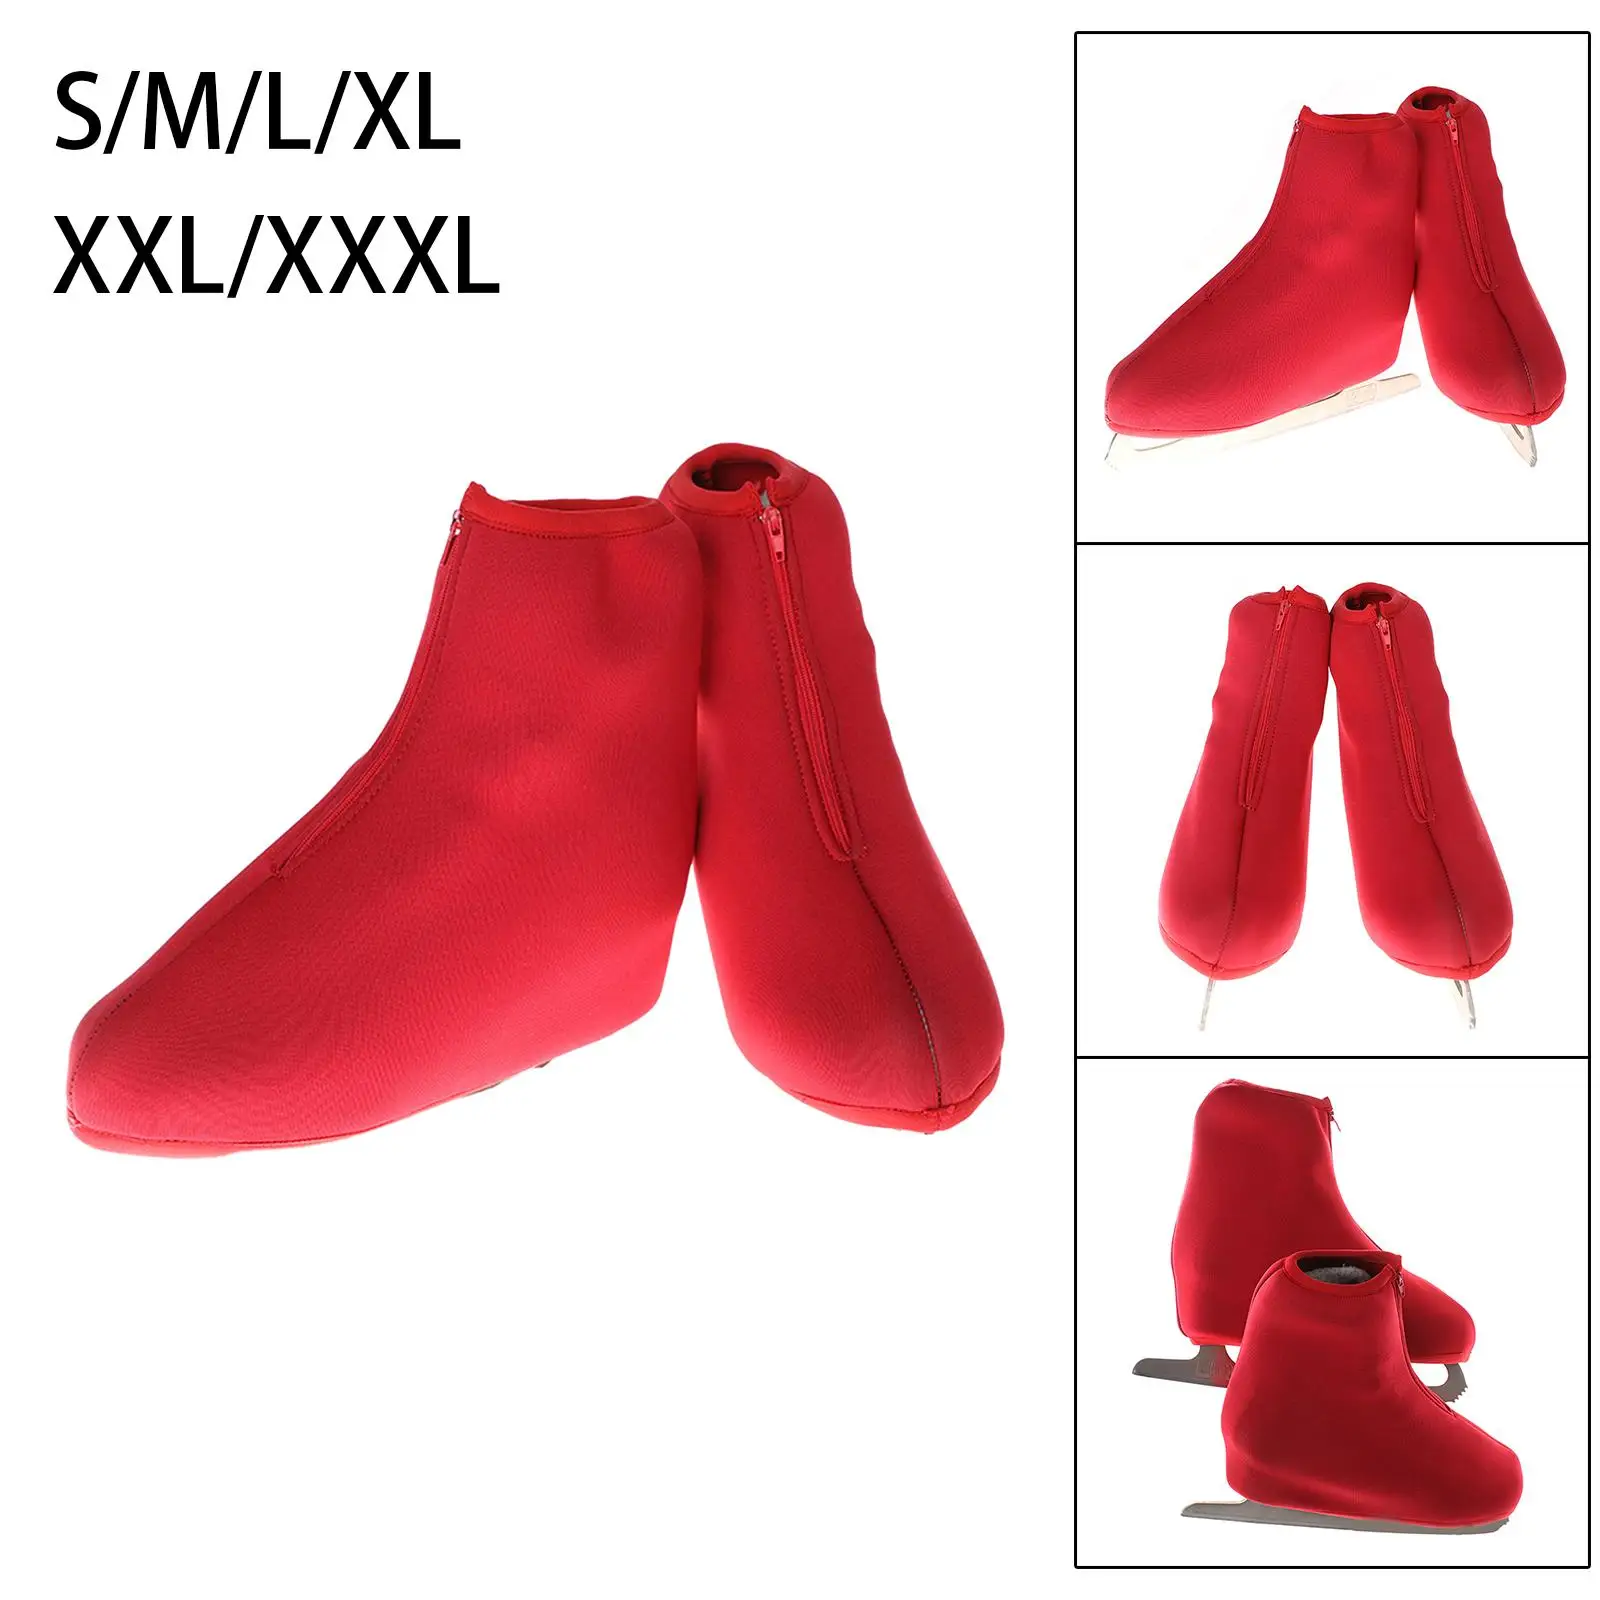 1 Pair Skate Boot Covers Overshoes Skating Boot Covers Durable Durable Shoes Protector Protective Men Women for Ice Skating